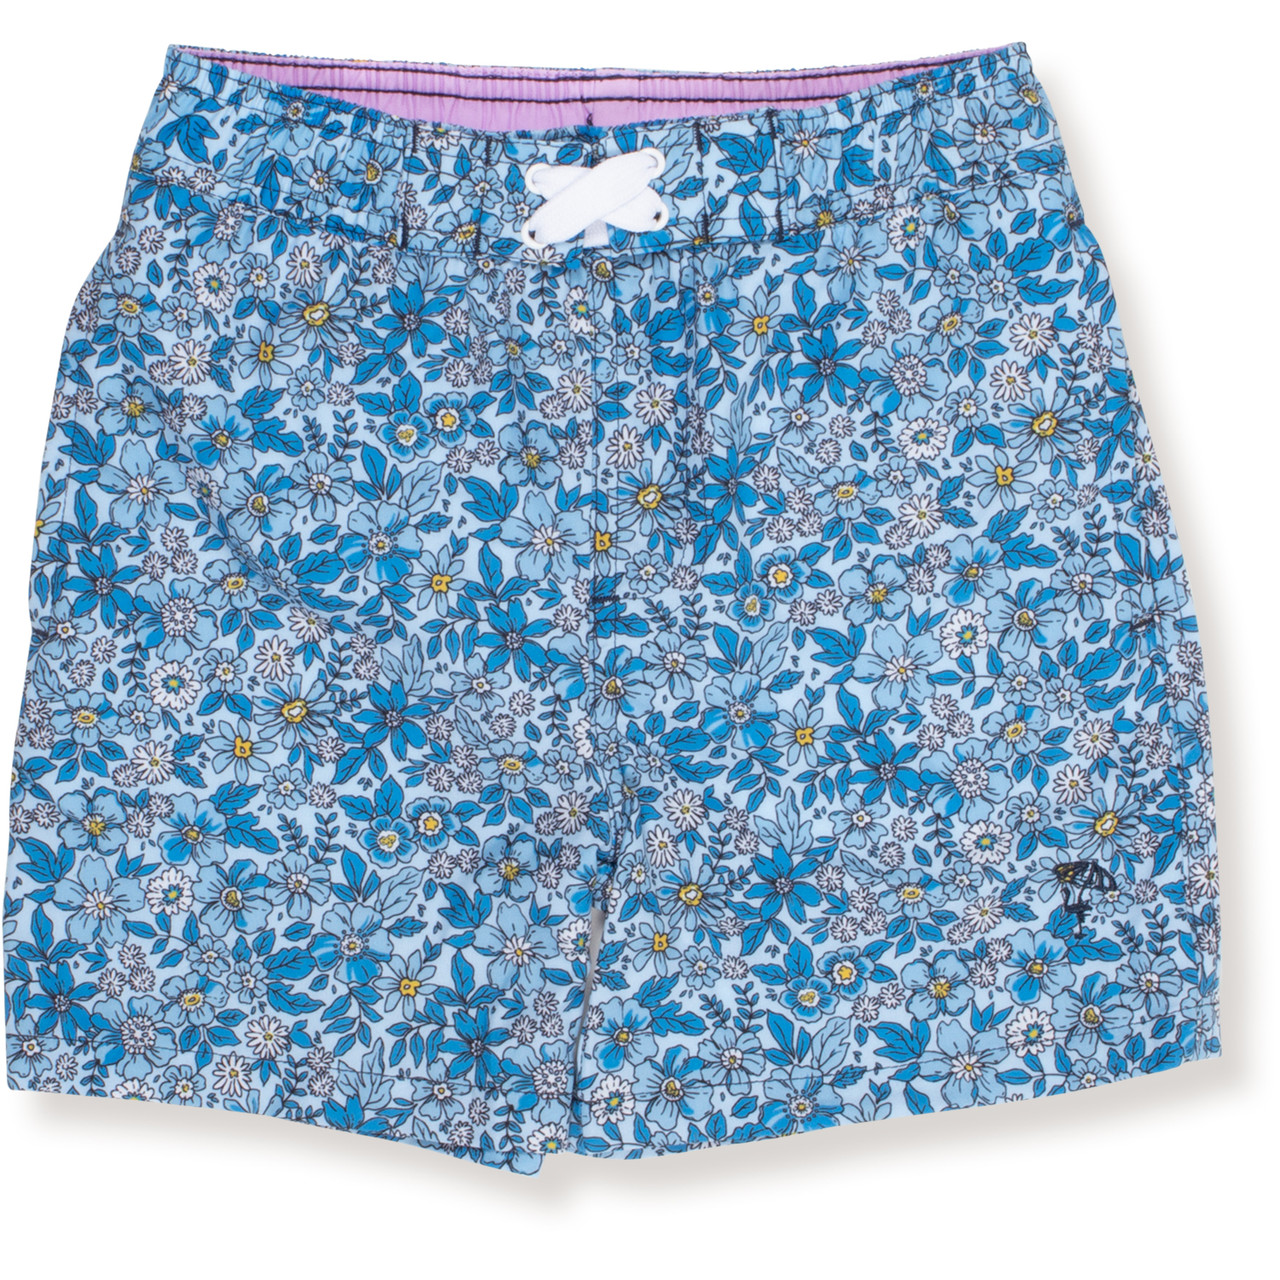 4 Way Stretch Swim Trunks Boys 6m-6 Ditsy Floral - Shade Critters